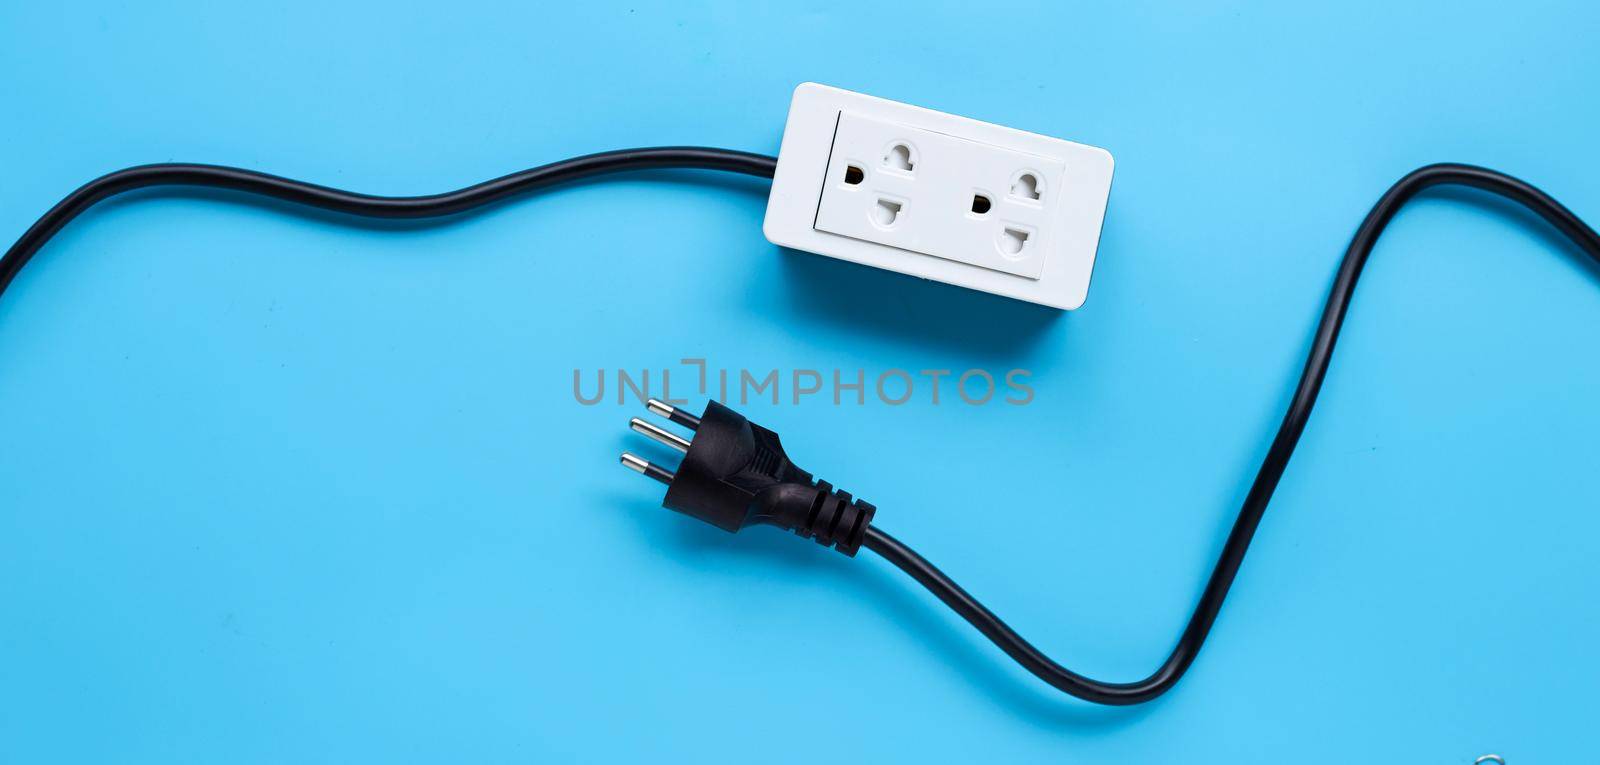 Electrical power strip and plug on blue background. Top view